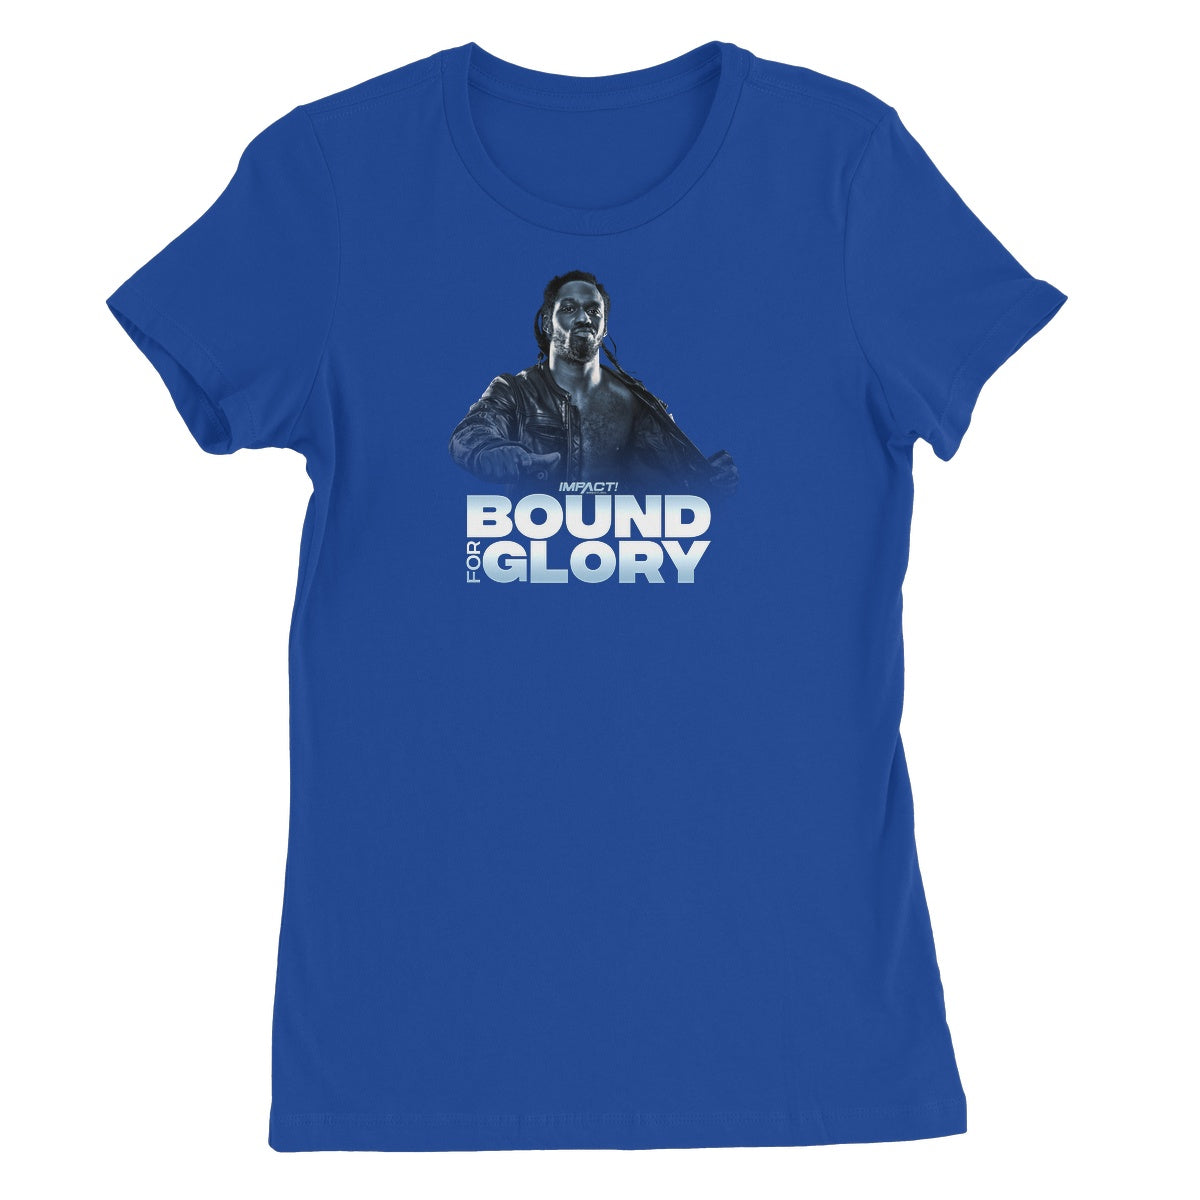 Bound For Glory 2020 - Swann Women's Favourite T-Shirt